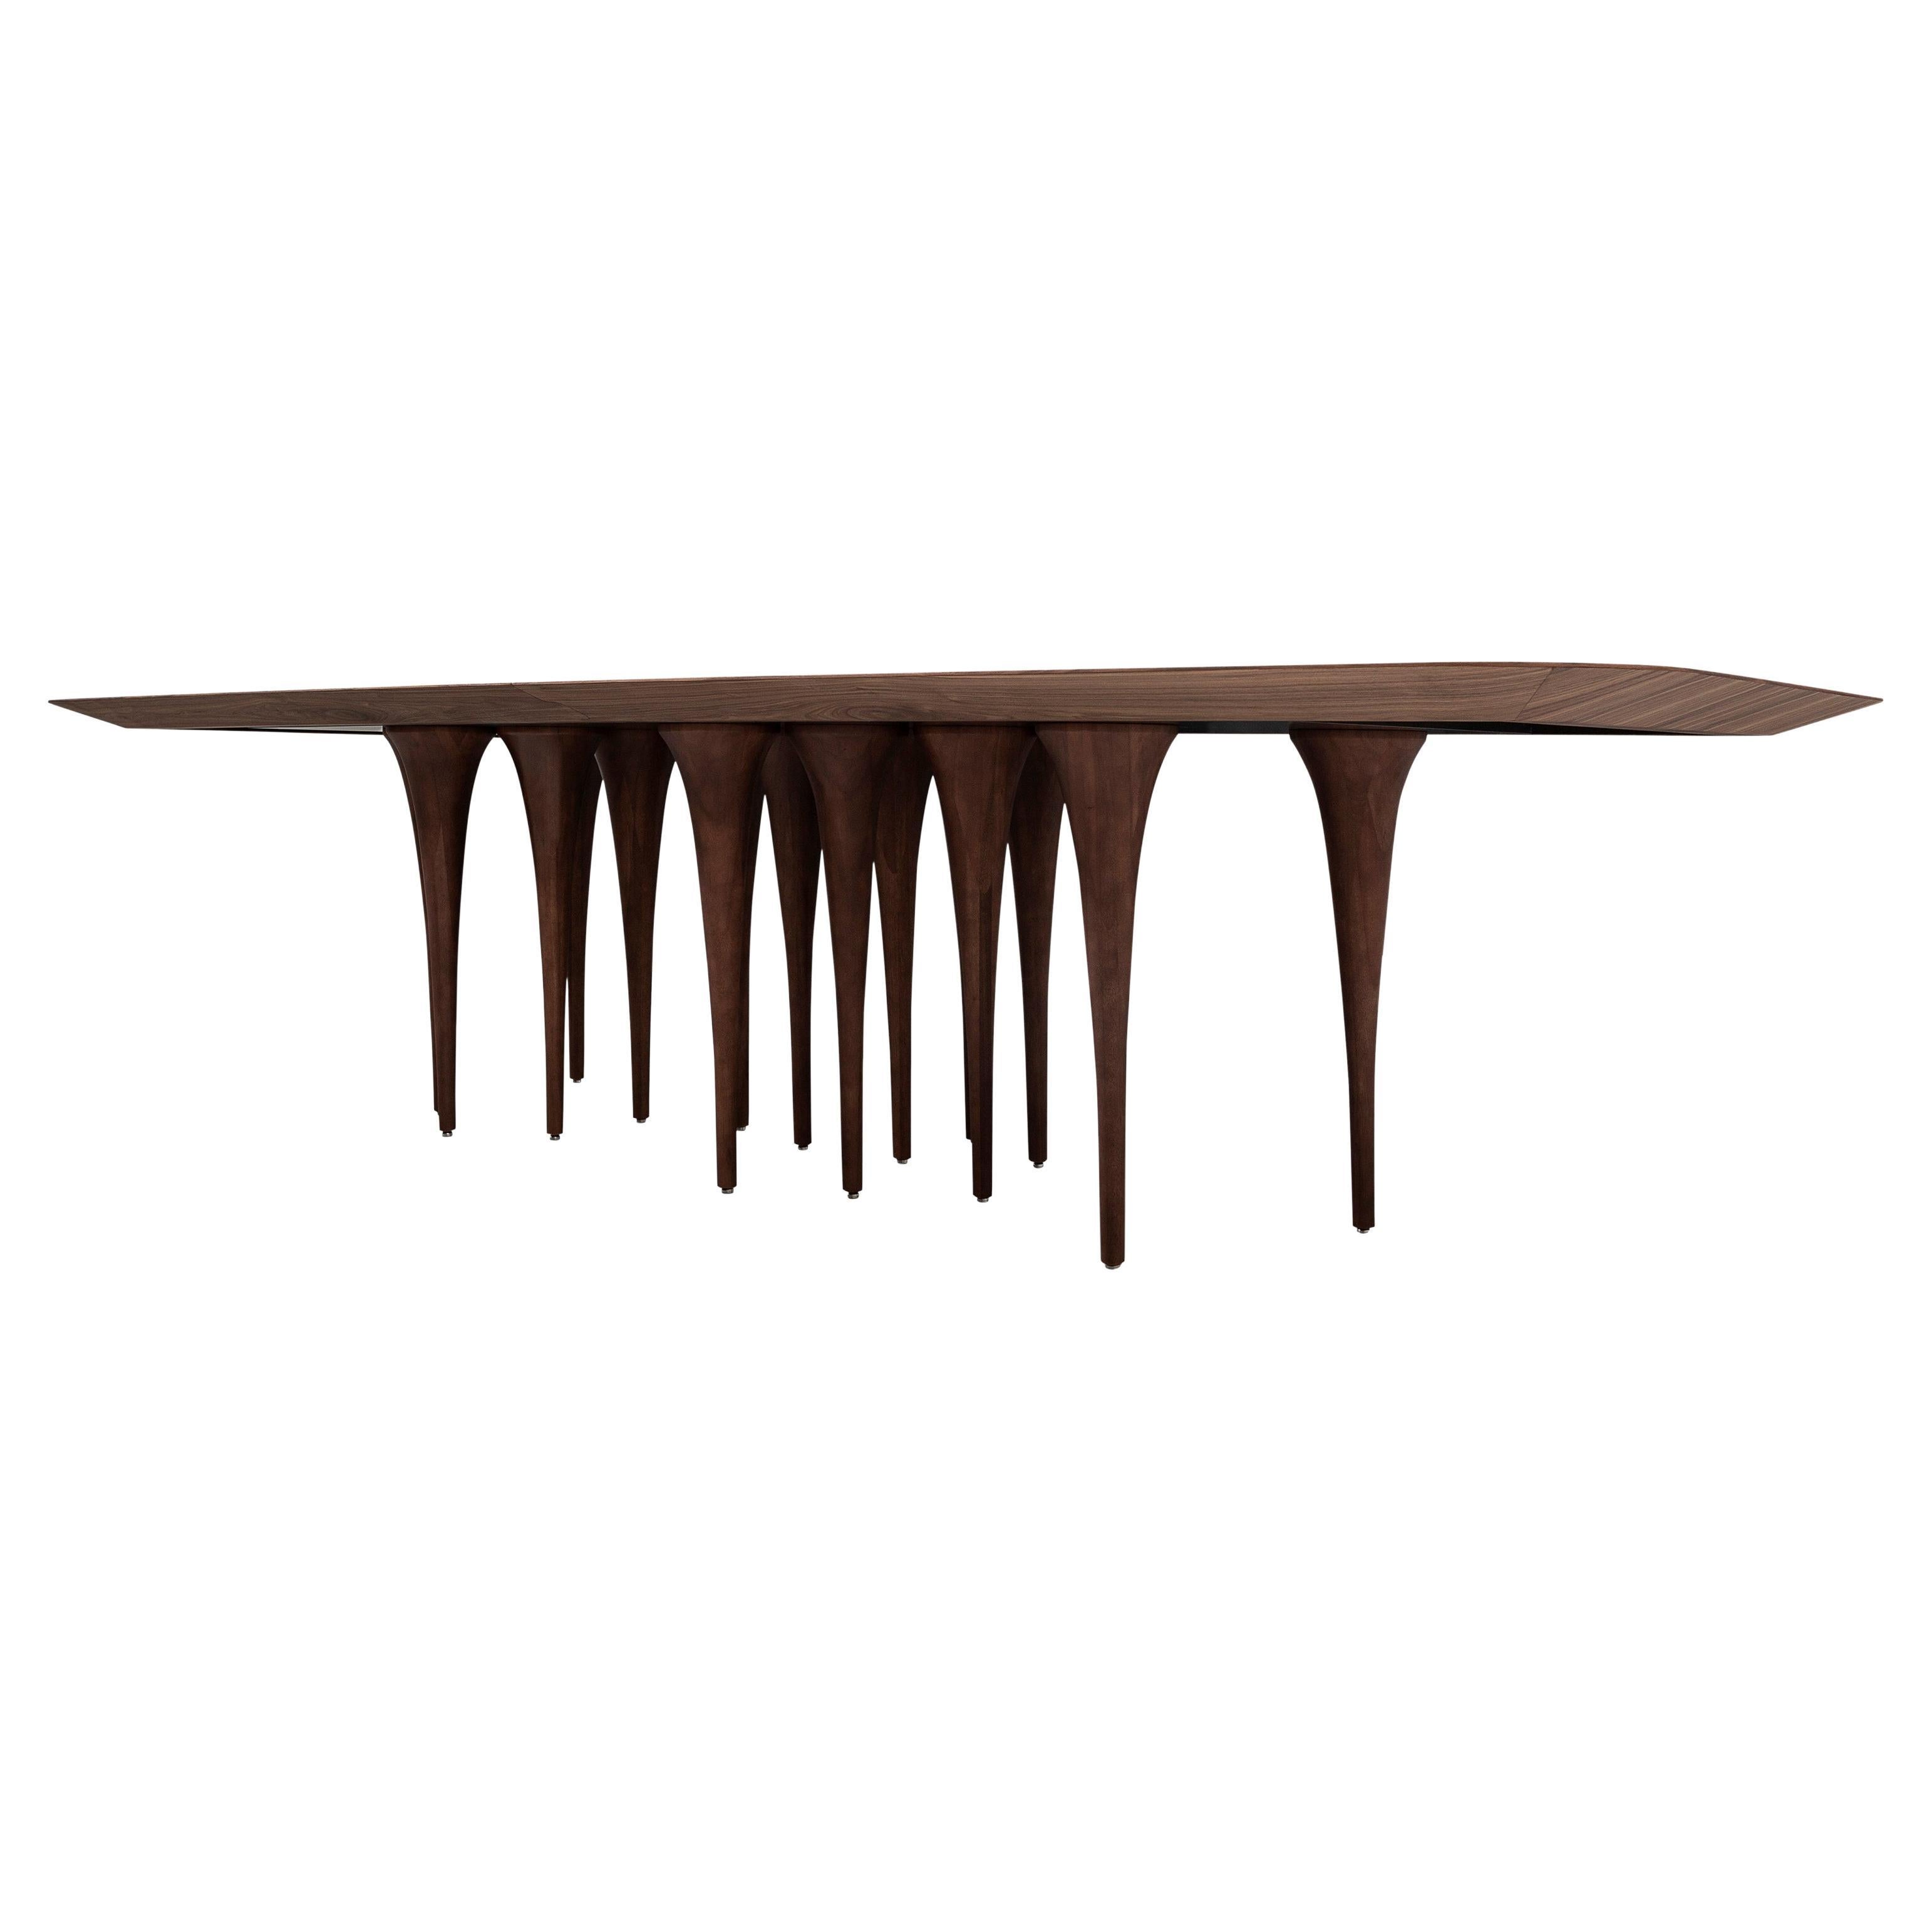 The Uultis team has created this rectangular Pin table in a walnut wood finish top with sixteen legs causing a surprising impact at first sight. It has a very singular and original structure resembling the corridors of gothic castles, but at the